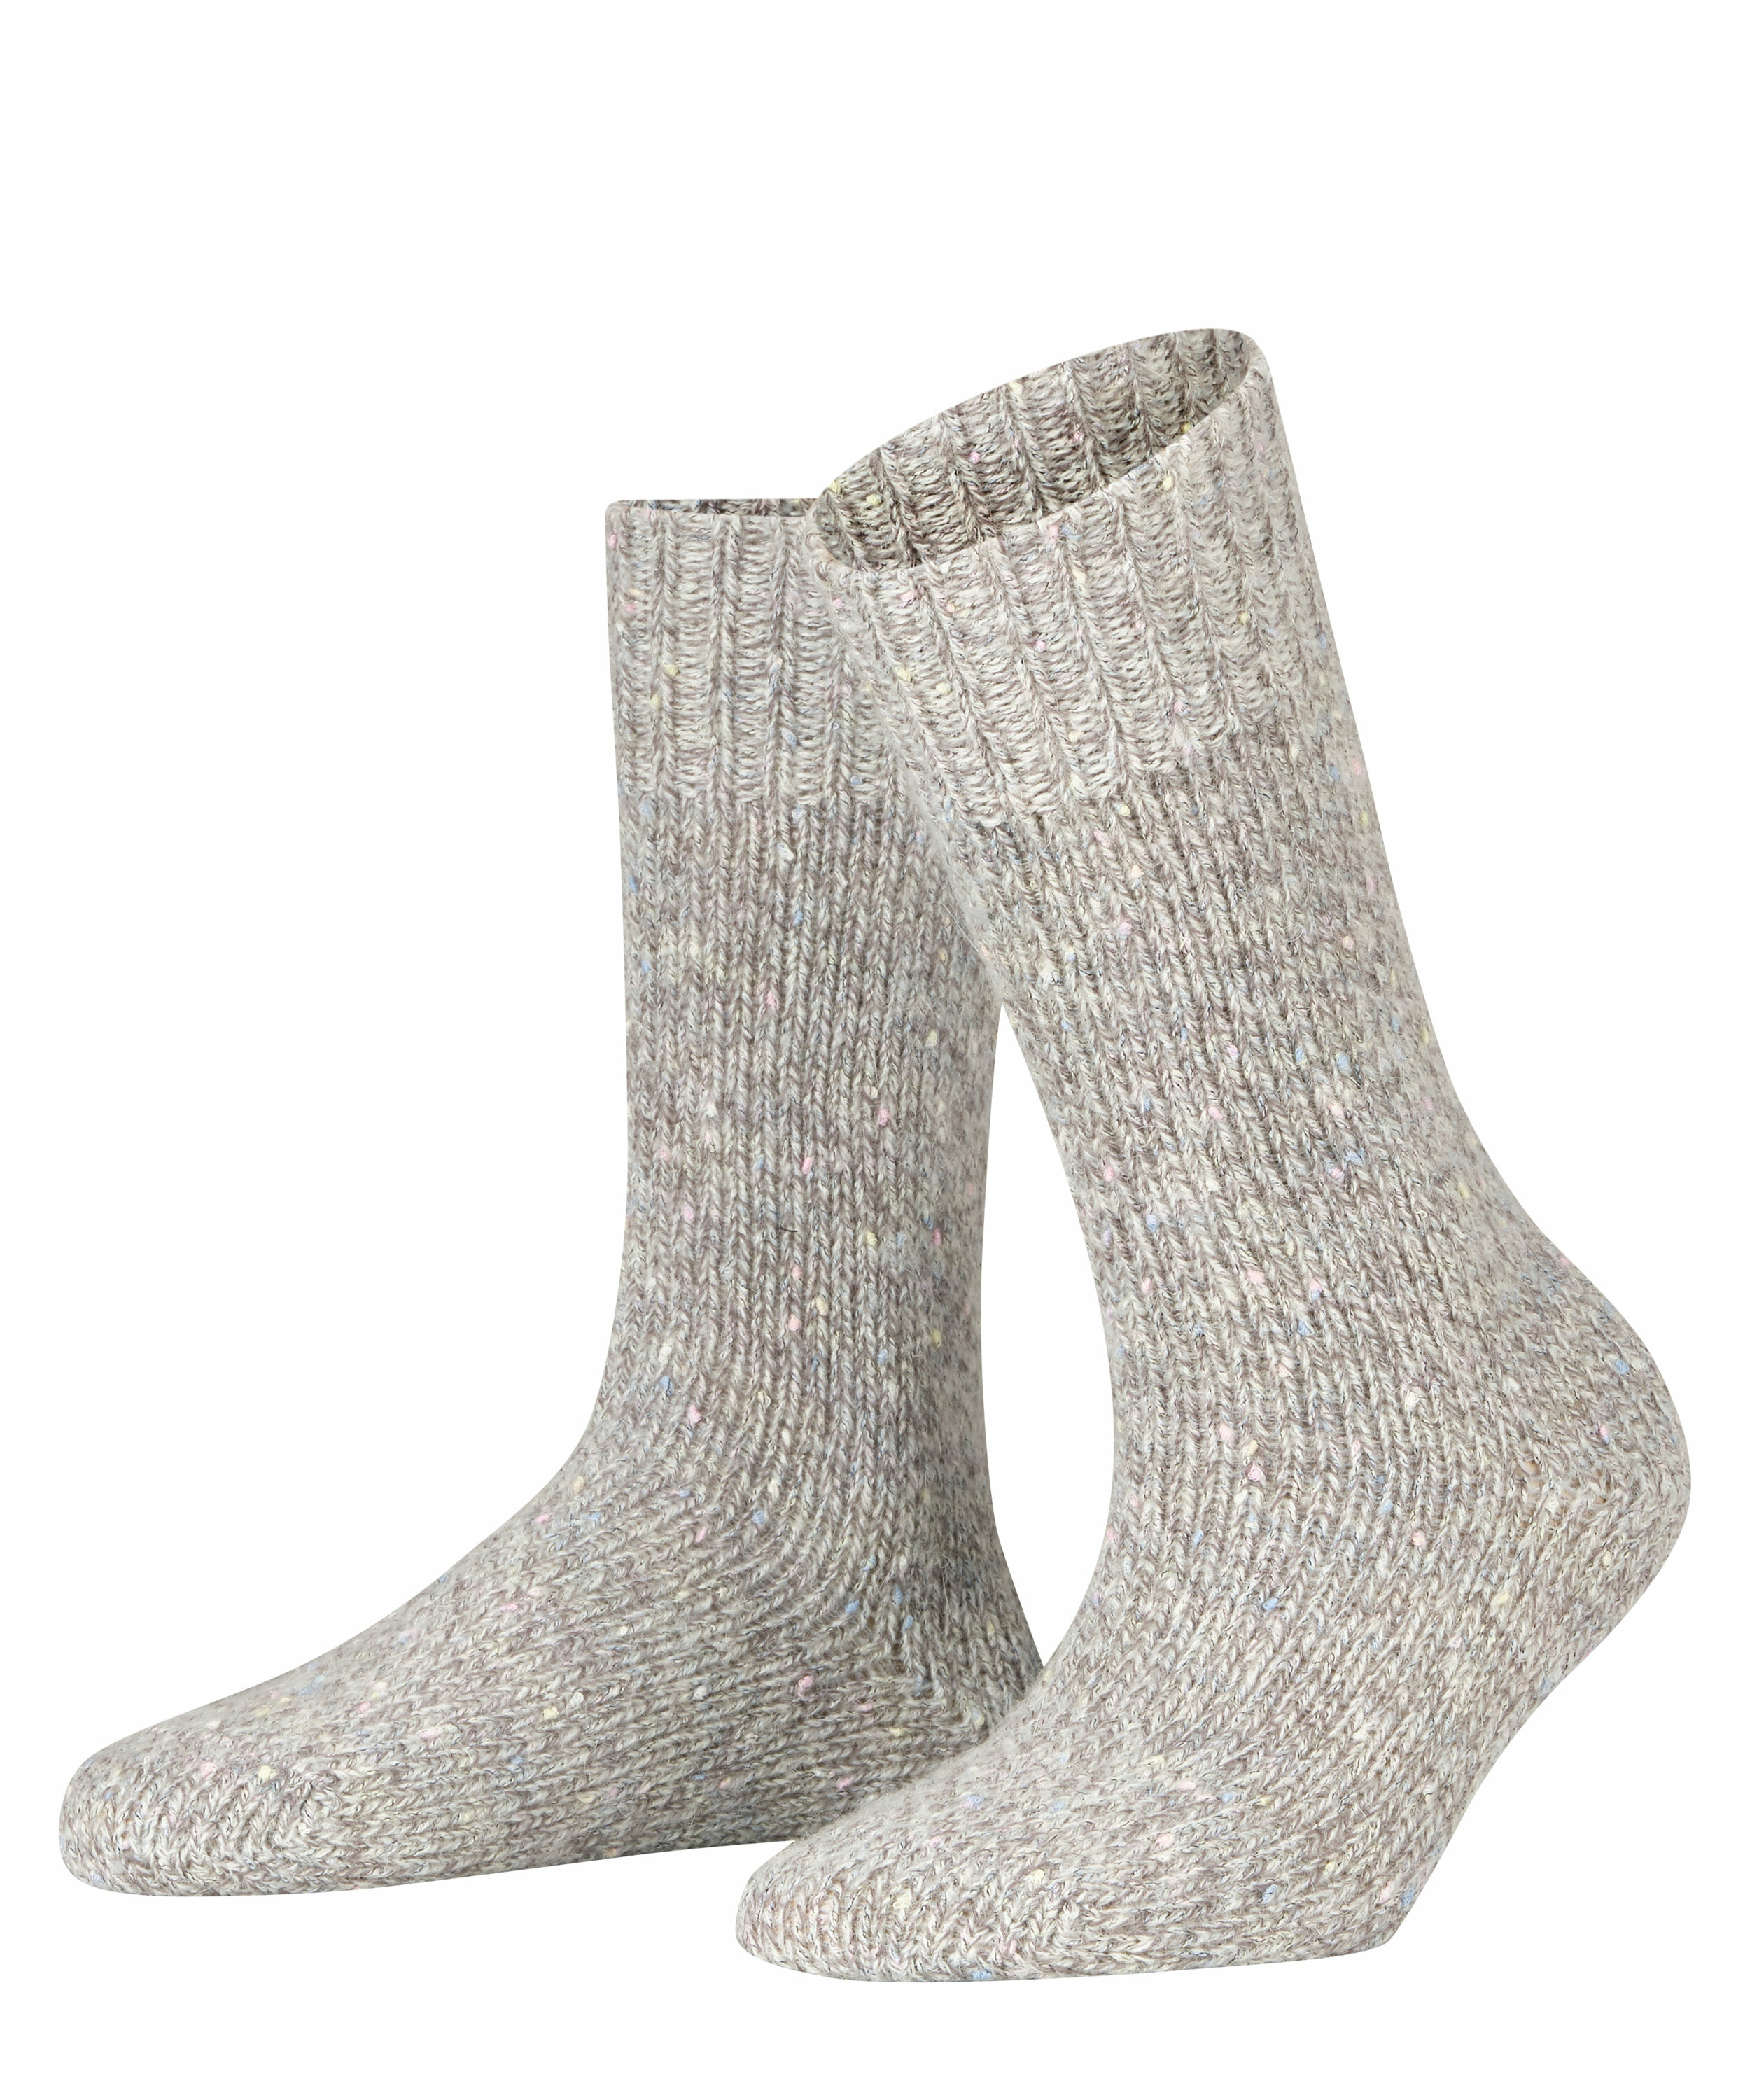 Boot-Socke "Casual Feel" mit Wolle